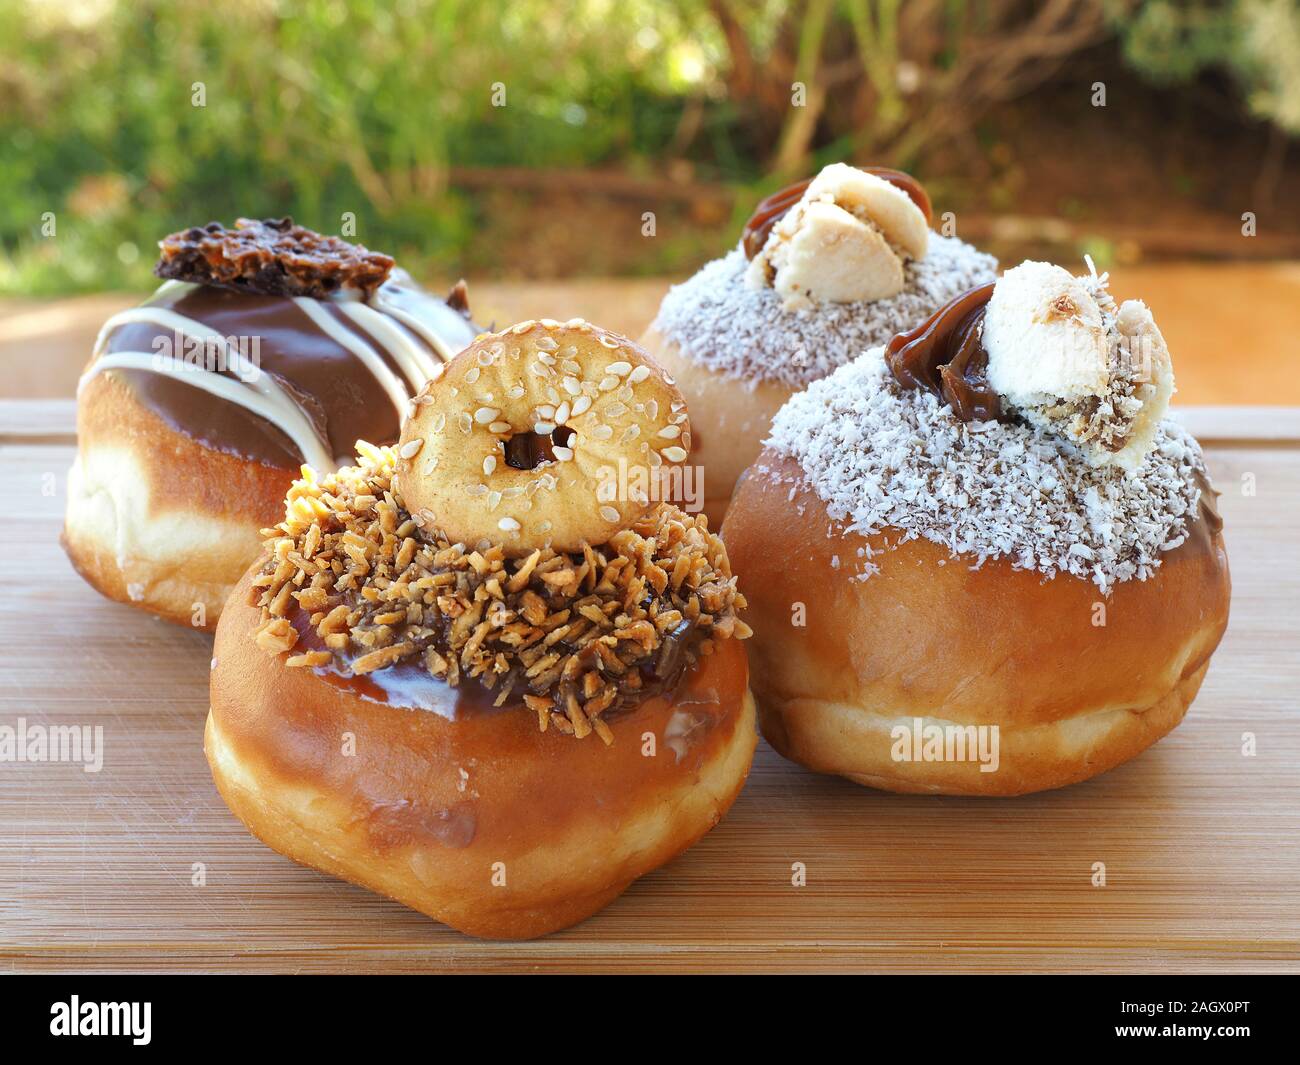 Four delicious donuts with different fillings. Blurred background. Stock Photo